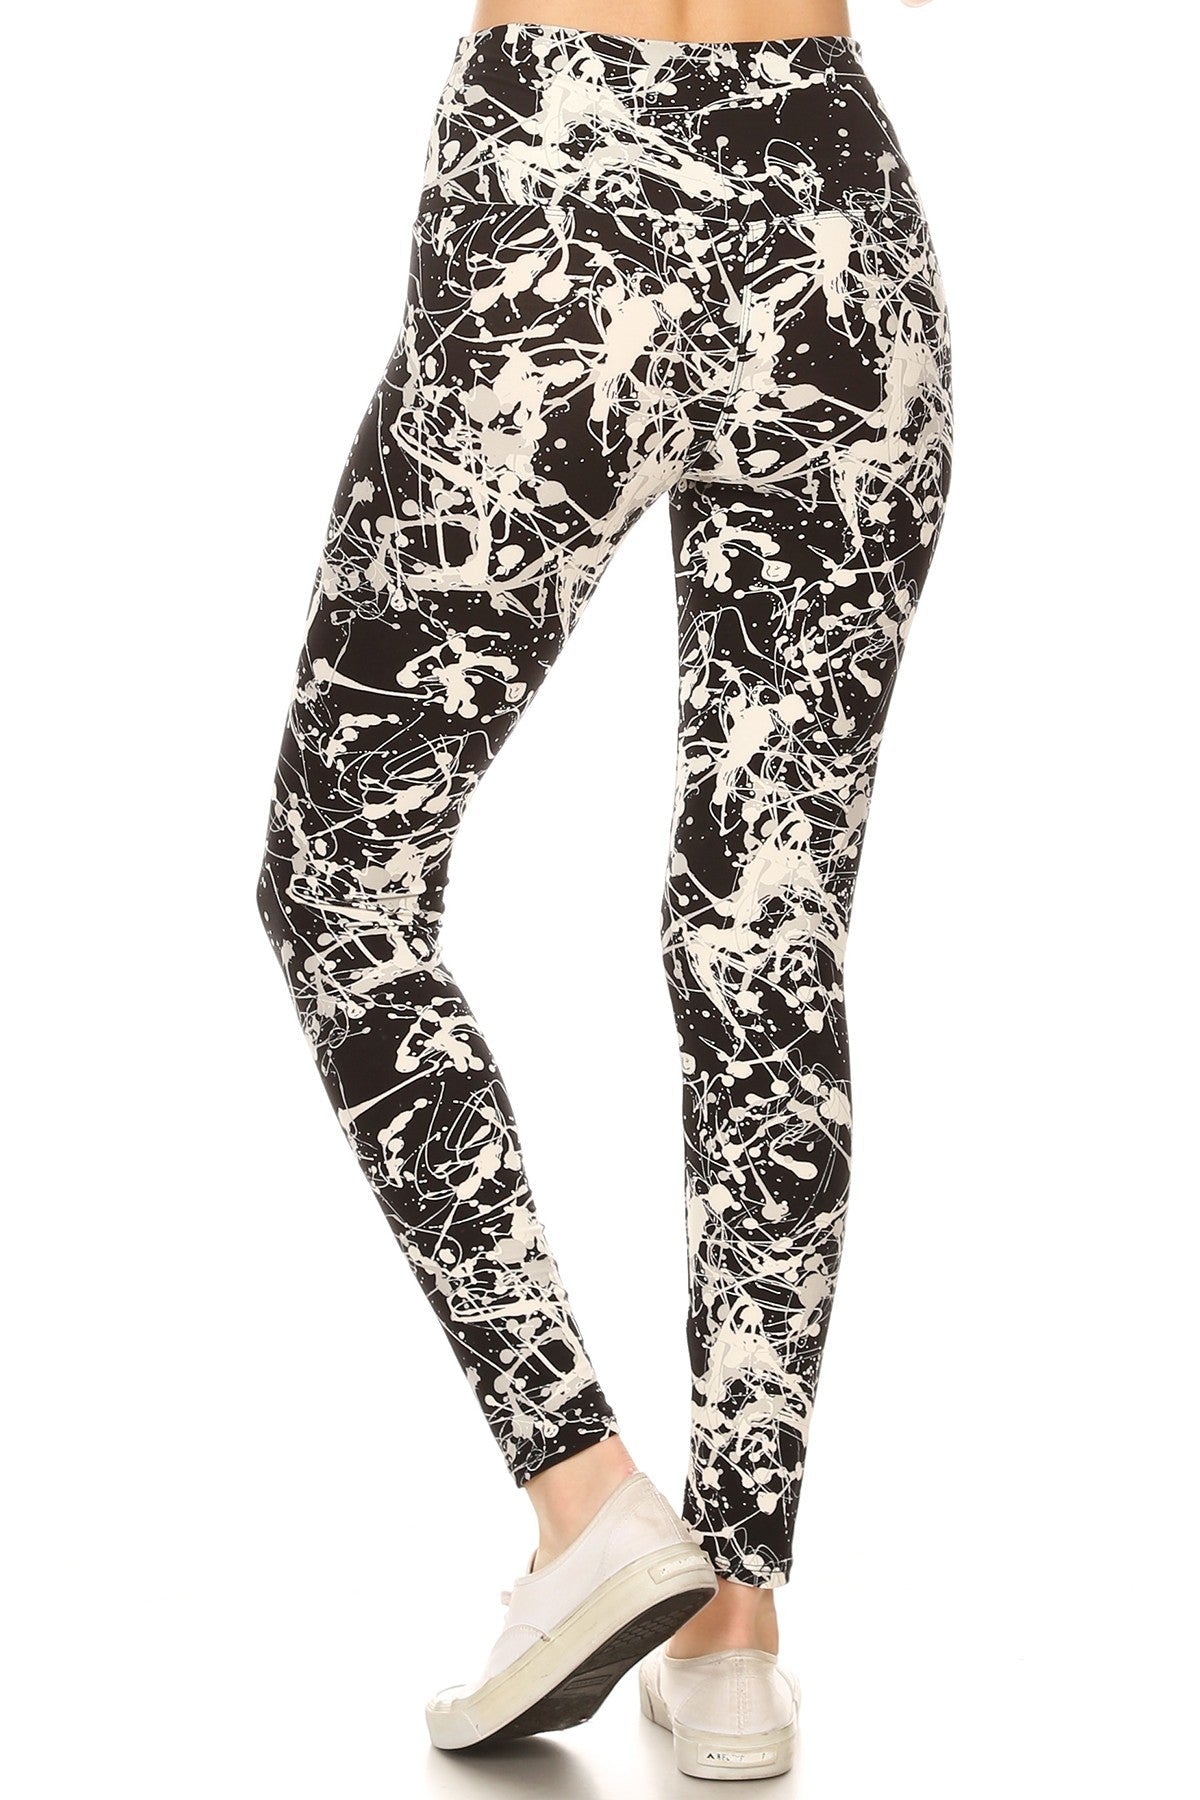 Long Yoga Style Banded Lined Paint Splatters Printed Knit Legging With High Waist Blue Zone Planet